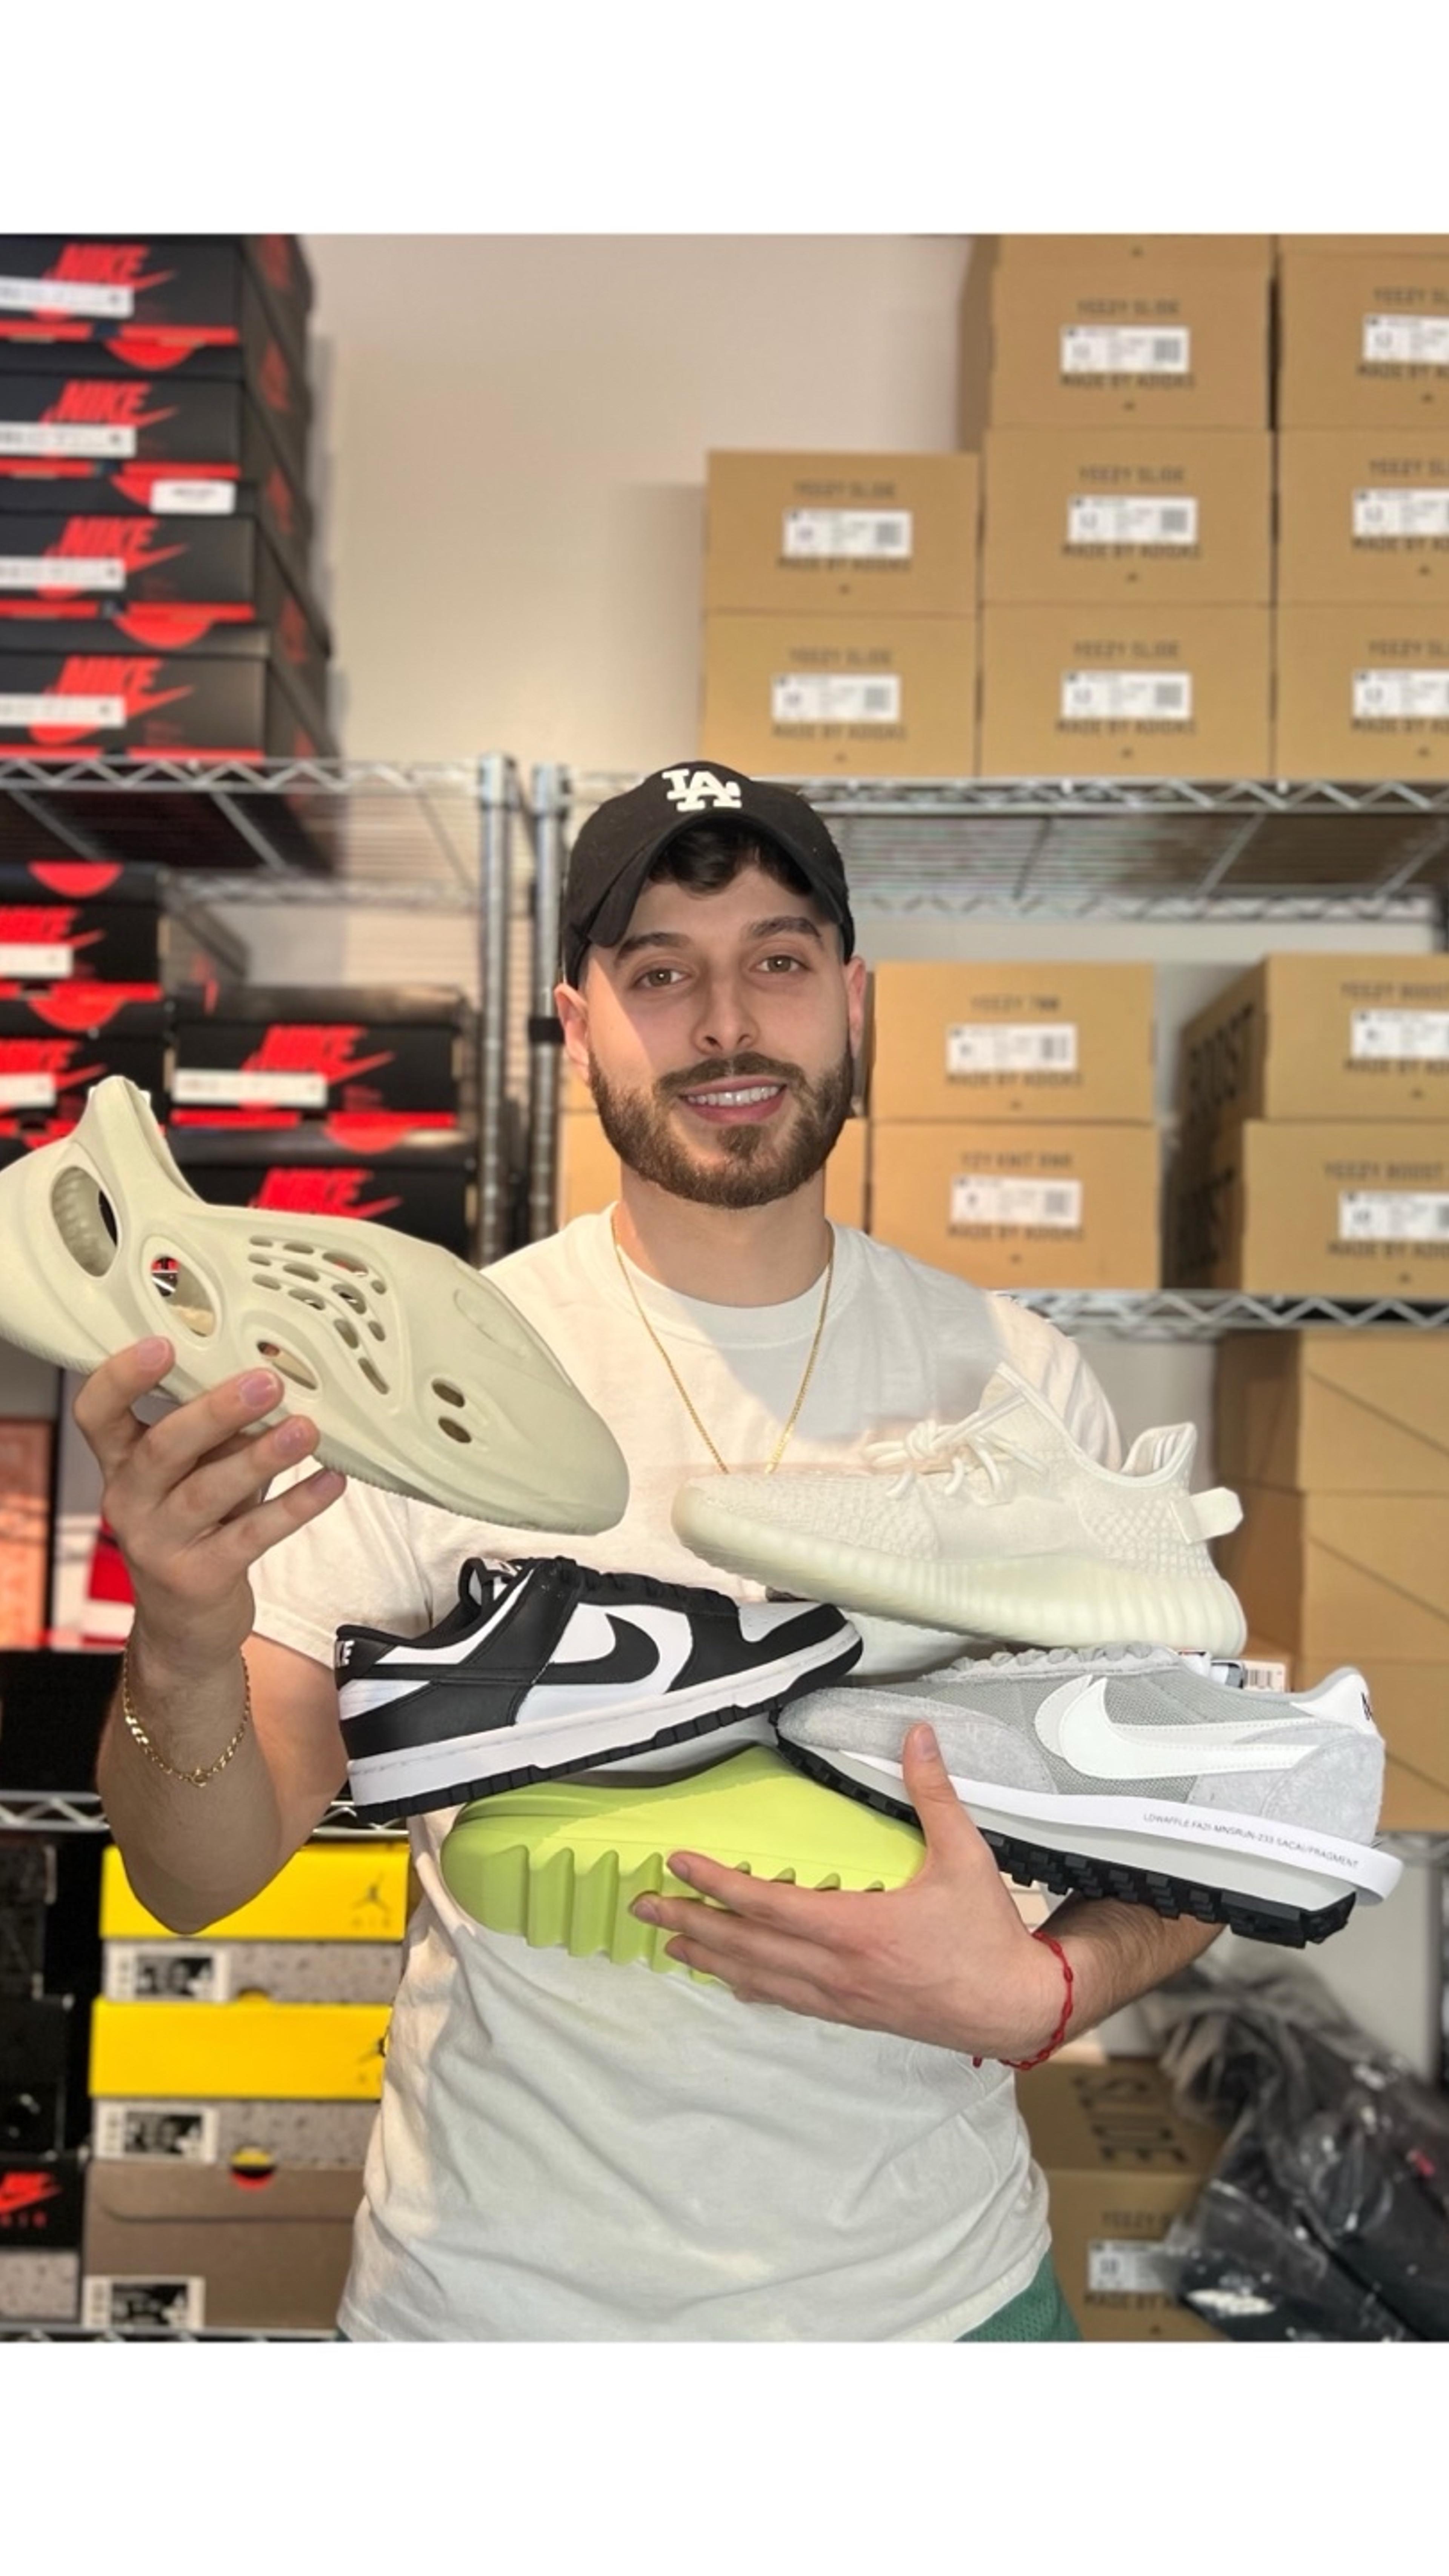 Preview image for the show titled "Sneaker Auctions!!" at May 21, 2024